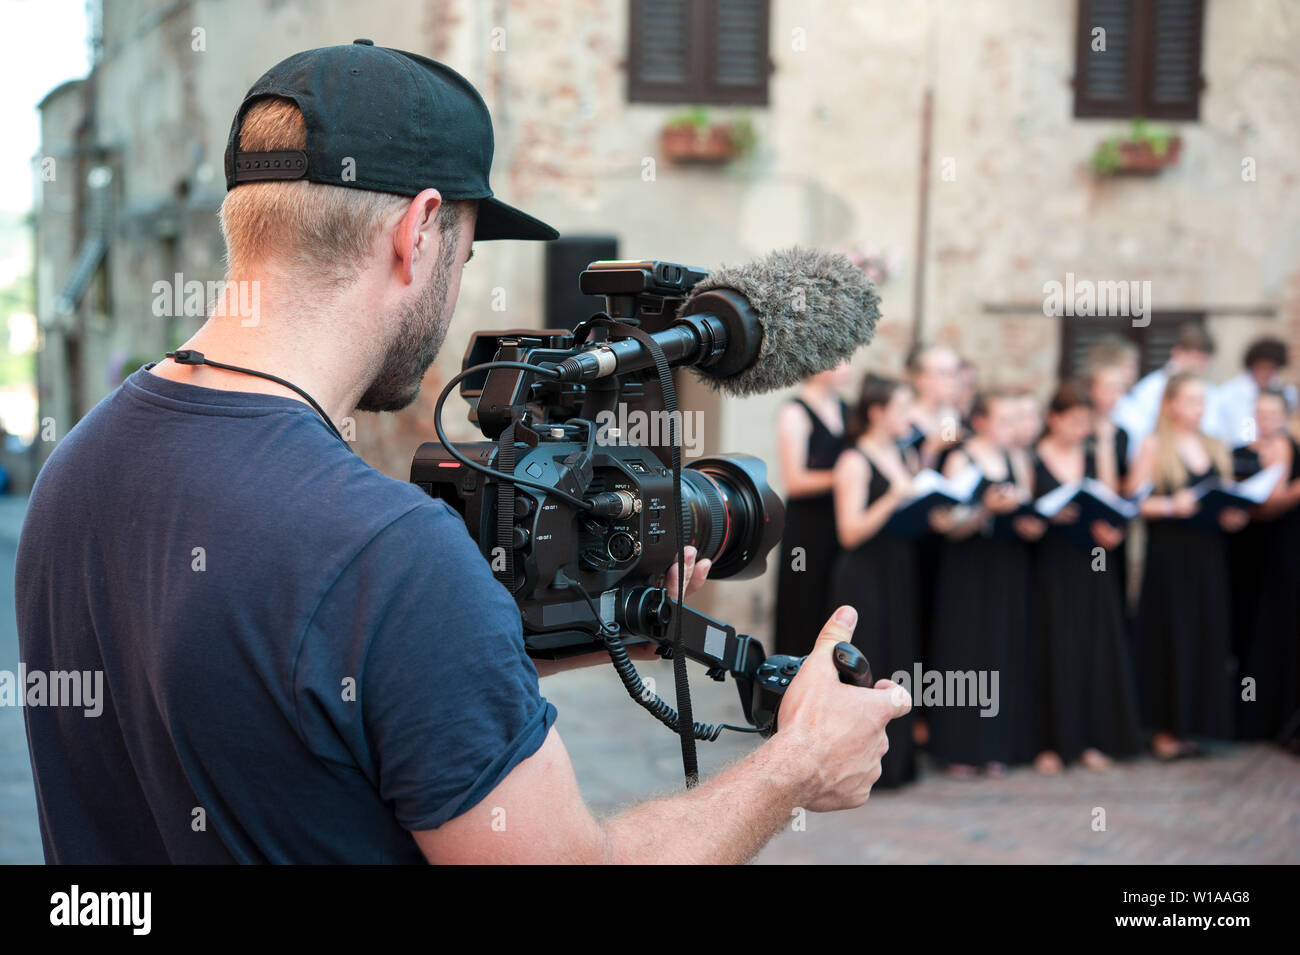 Cameraman captures video and audio whit professional video camera, during an outdoor public live music performance. Stock Photo